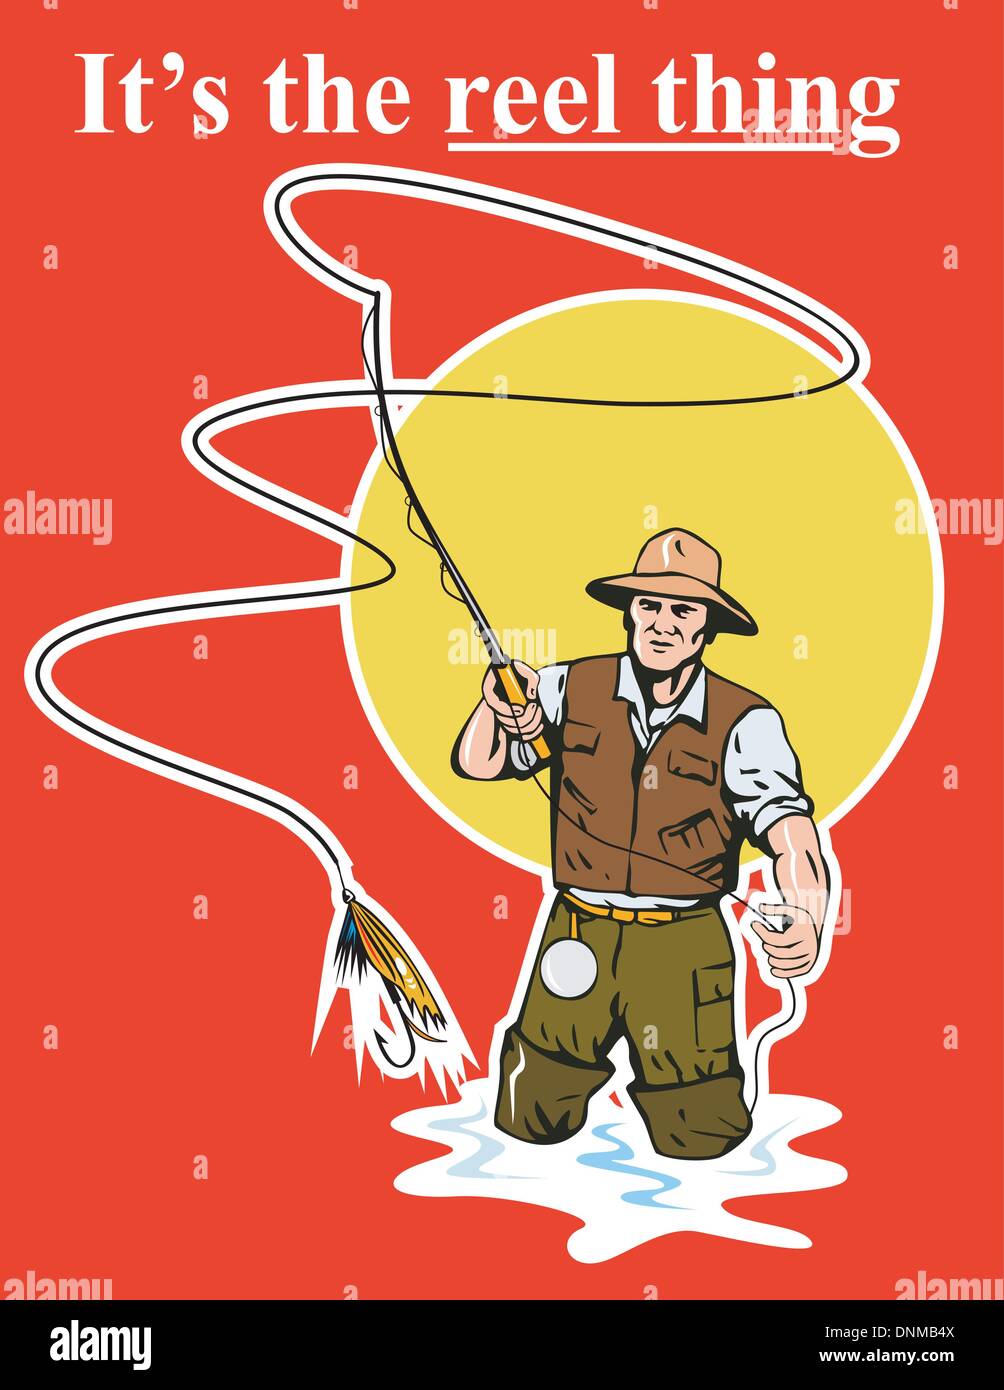 https://c8.alamy.com/comp/DNMB4X/graphic-design-illustration-of-a-fly-fisherman-casting-reel-with-fishing-DNMB4X.jpg